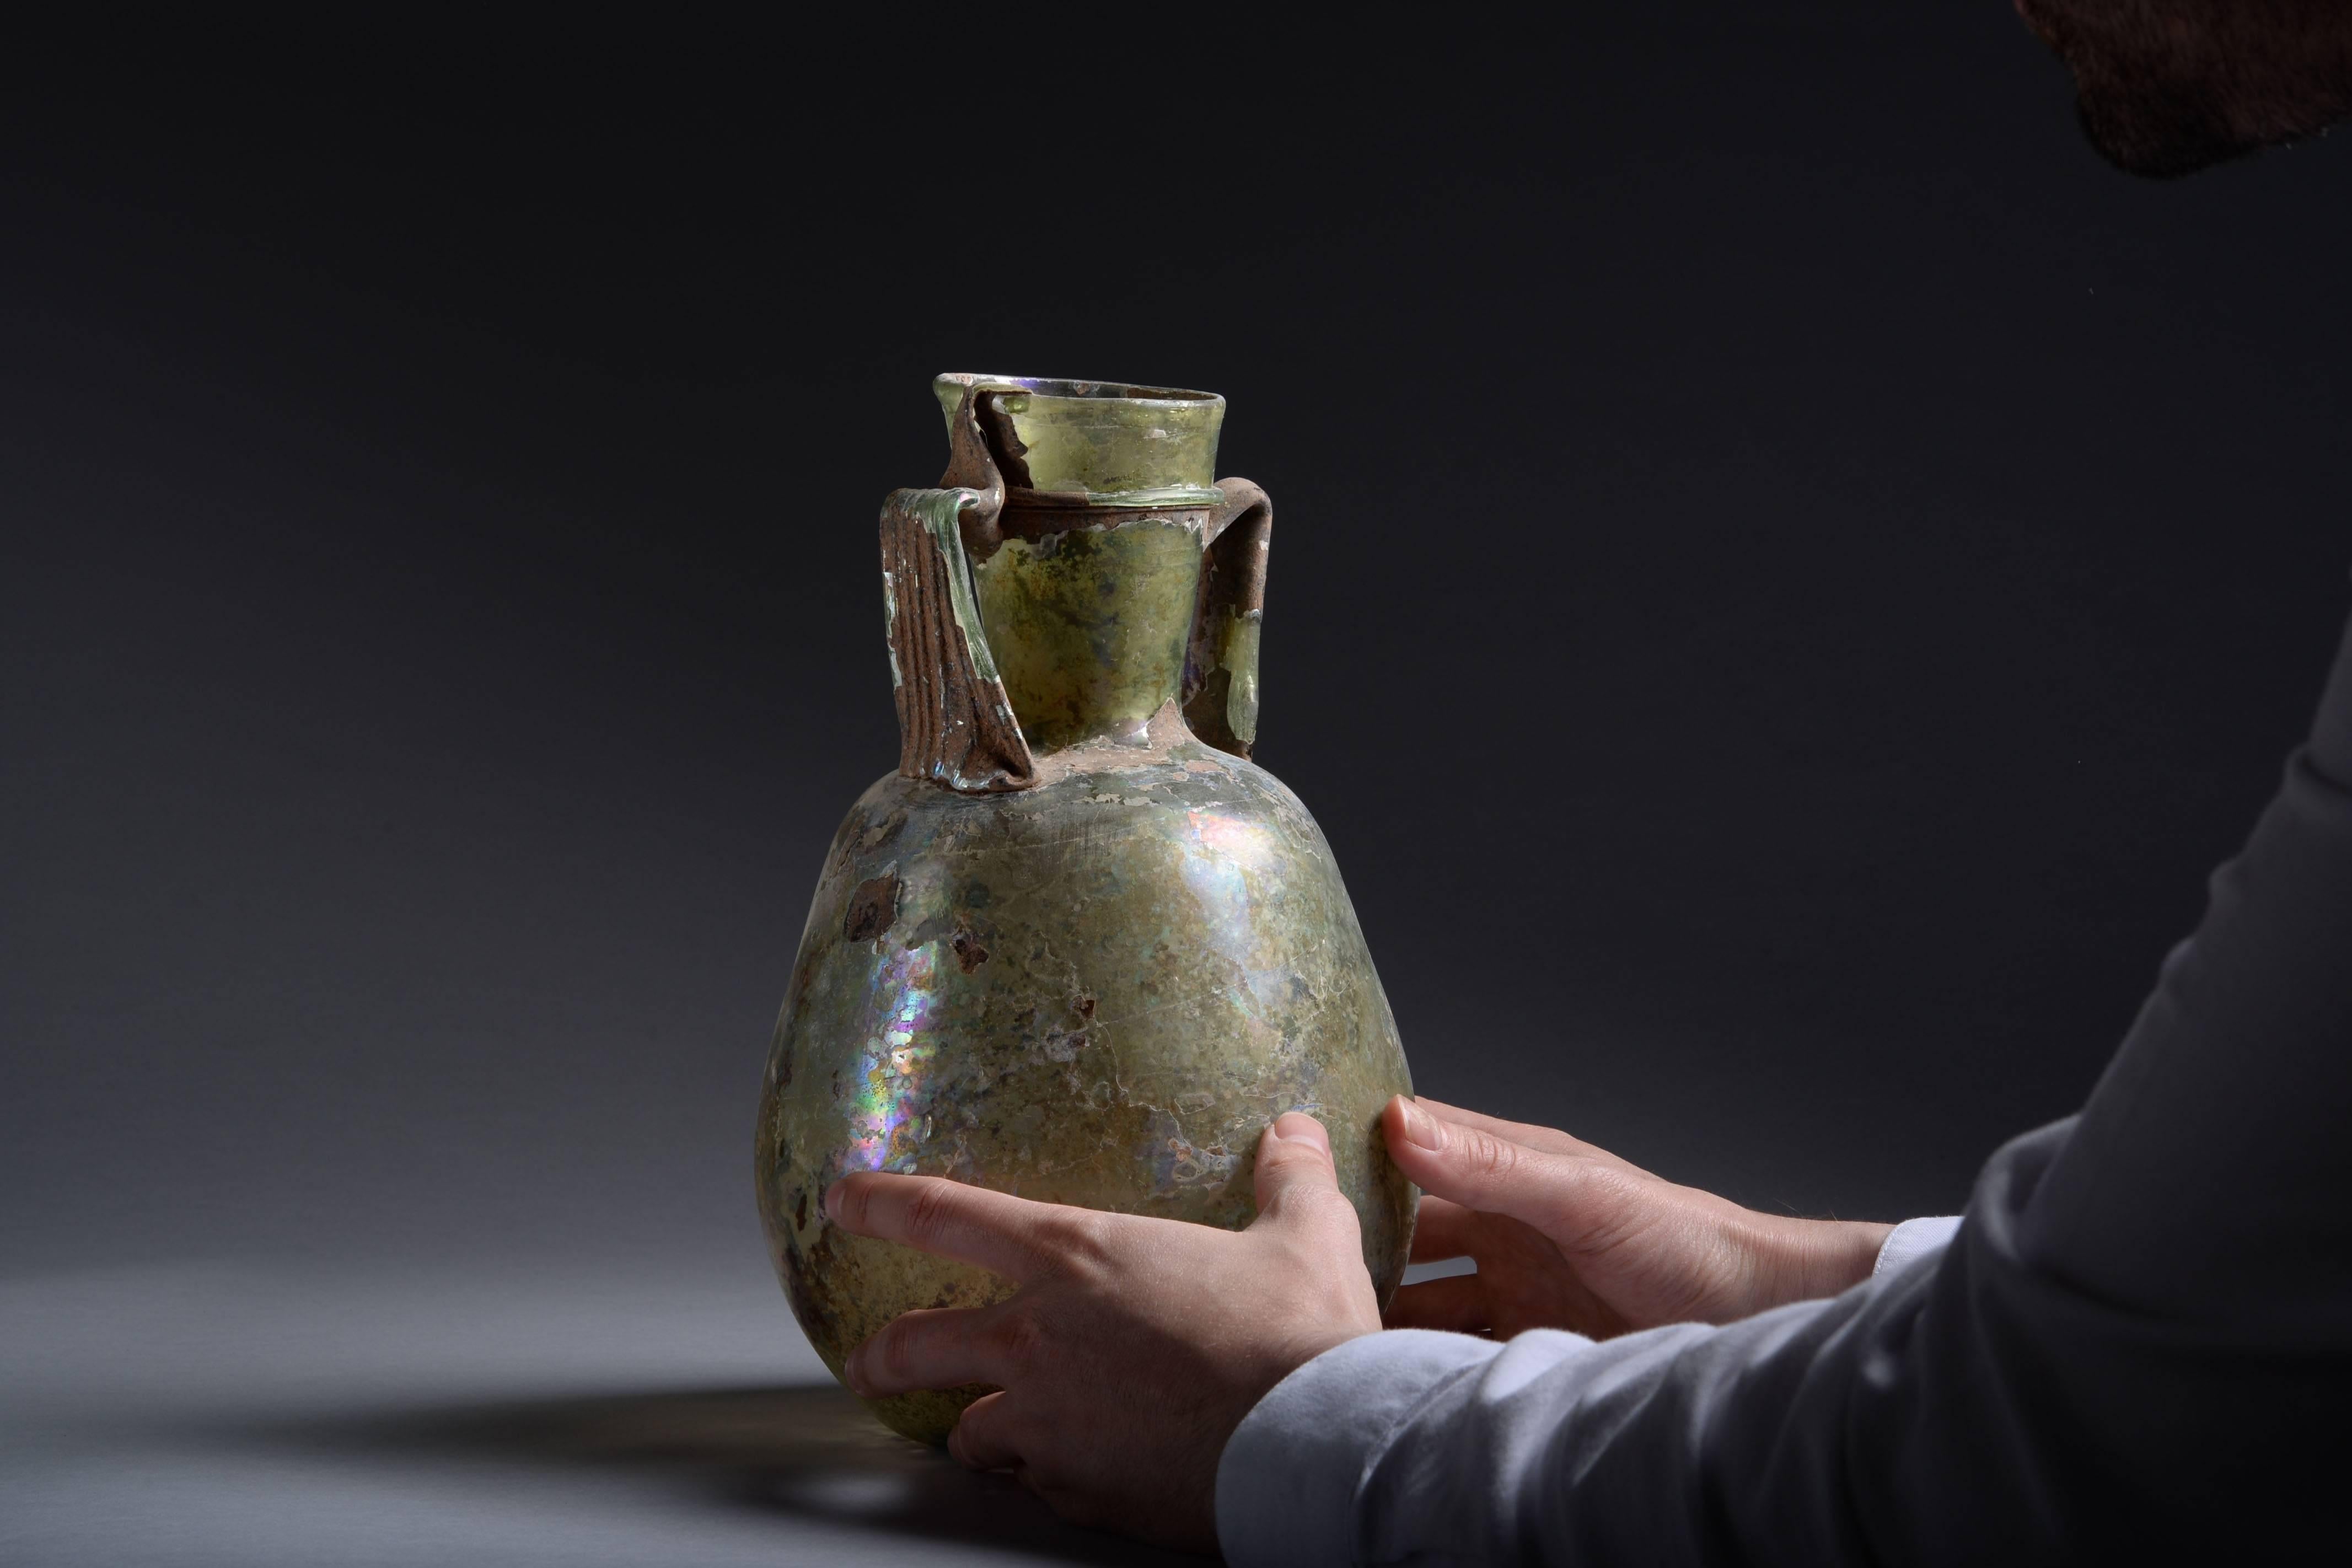 A large ancient Roman green glass Amphora from the Near East, dating to the 3rd century AD.

Free blown and sitting on a slightly indented base, with elongated body, rounded shoulders and flaring cylindrical mouth. The vessel is adorned with two